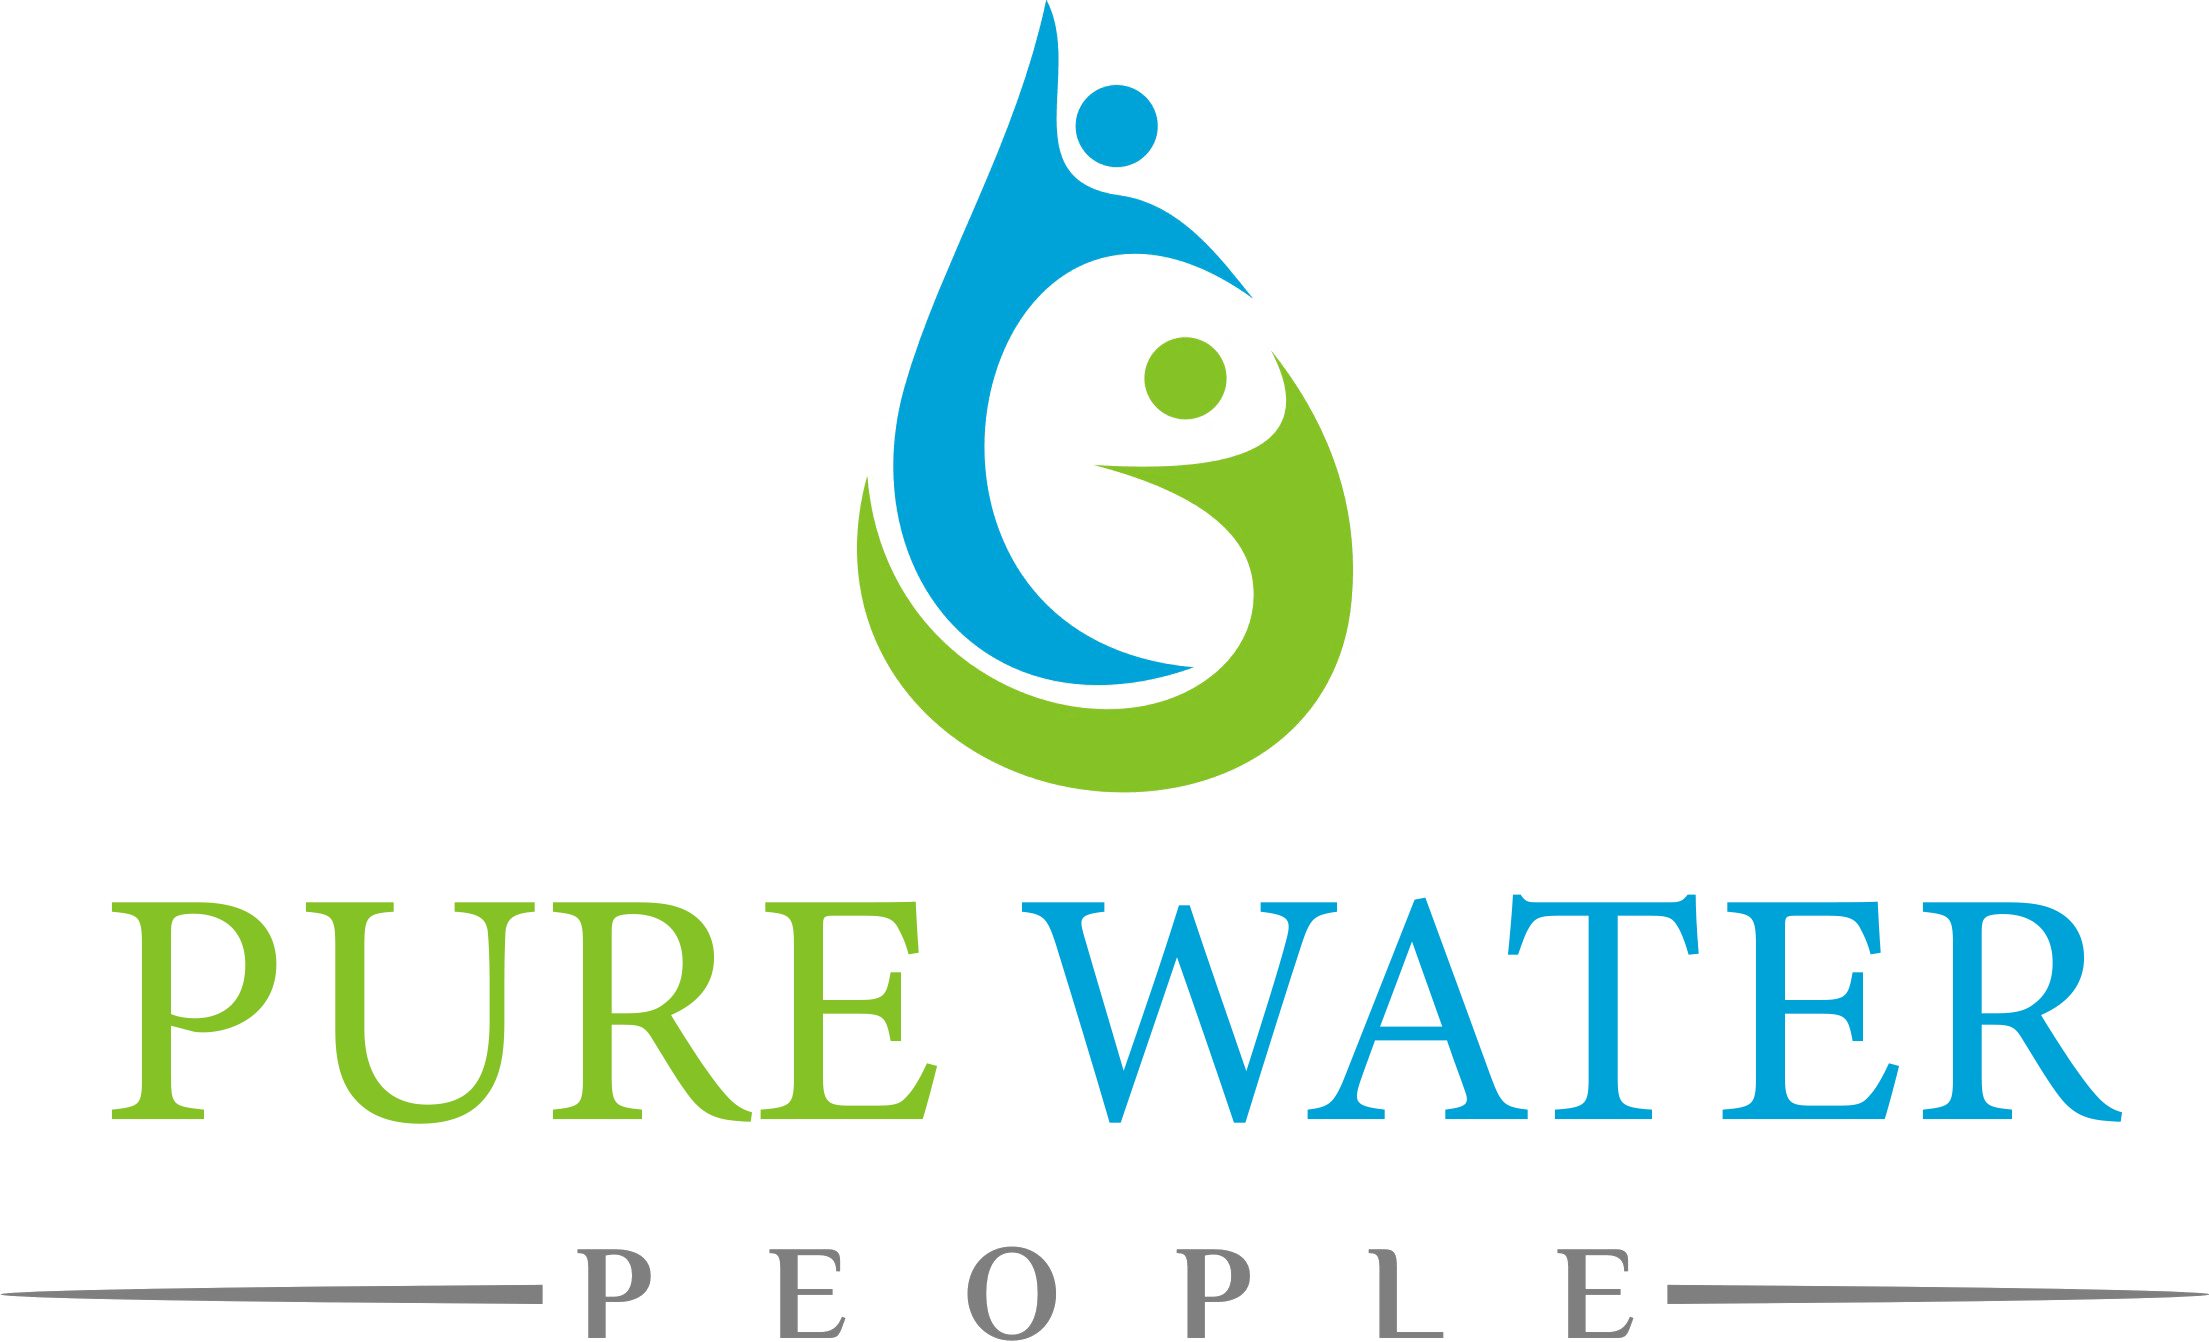 Water for People Logo - PwP Logo - The Pure Water People